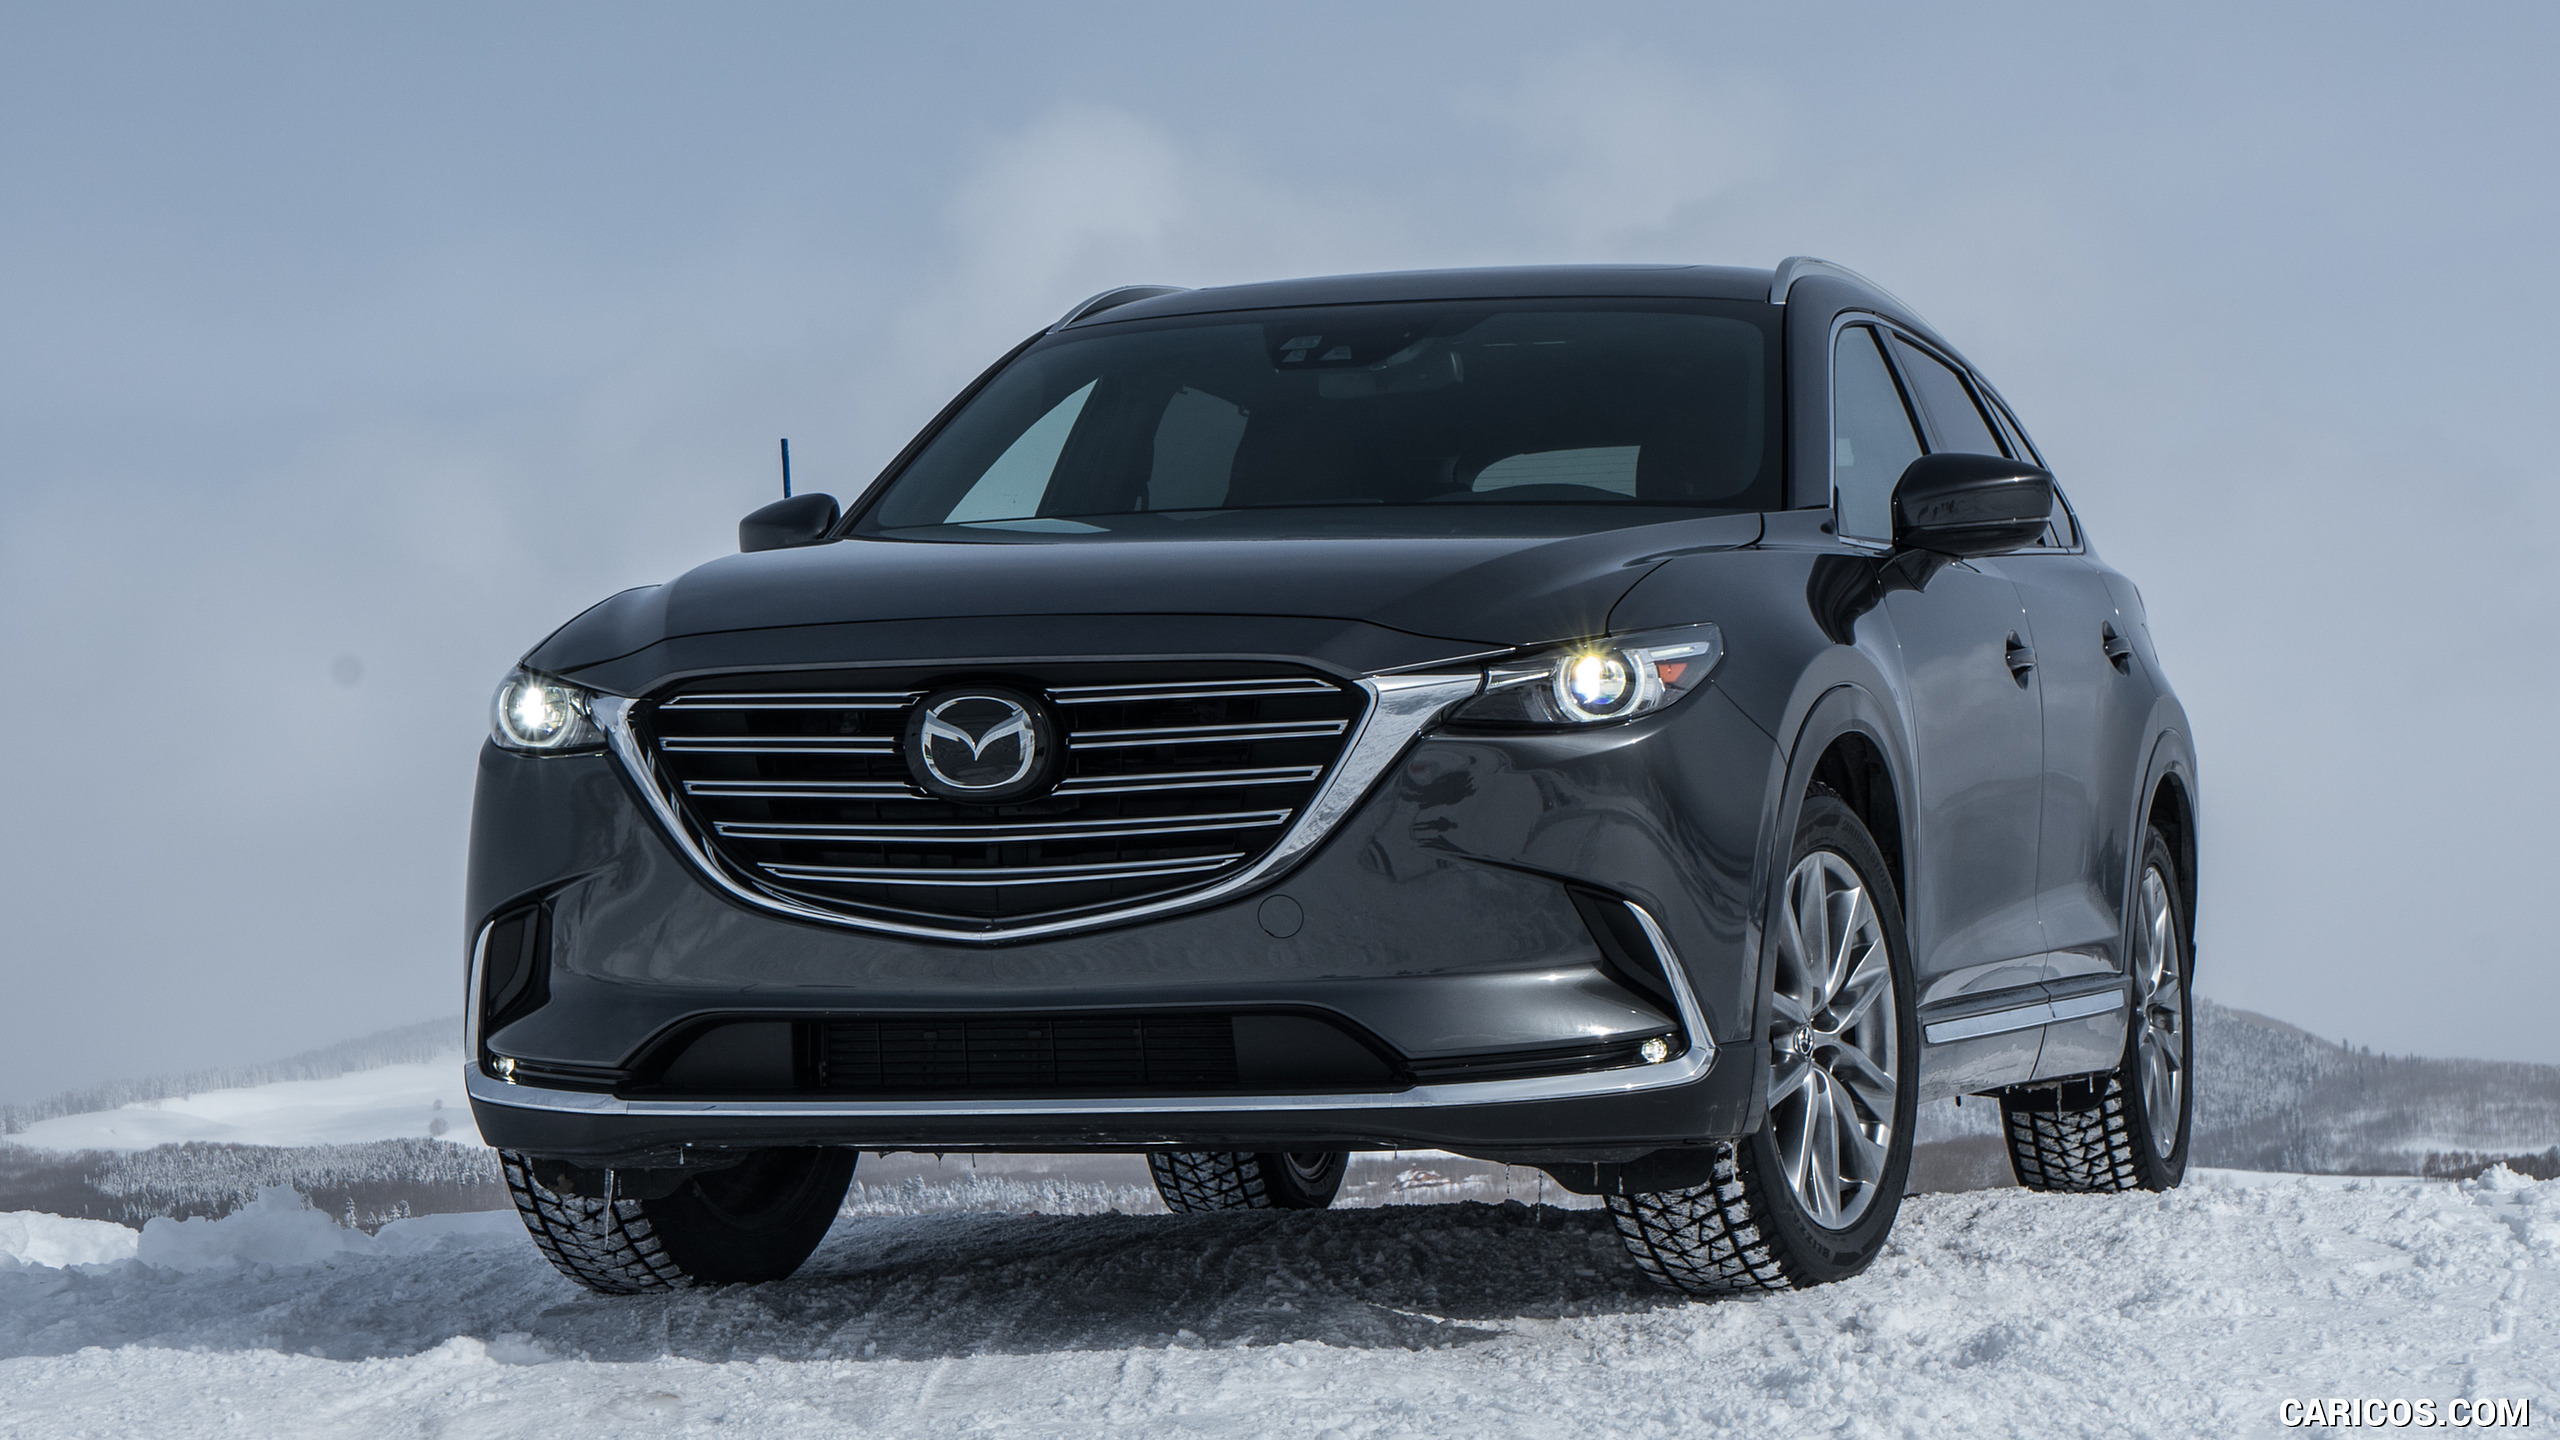 2016 Mazda CX-9 in Snow - Front, #66 of 69